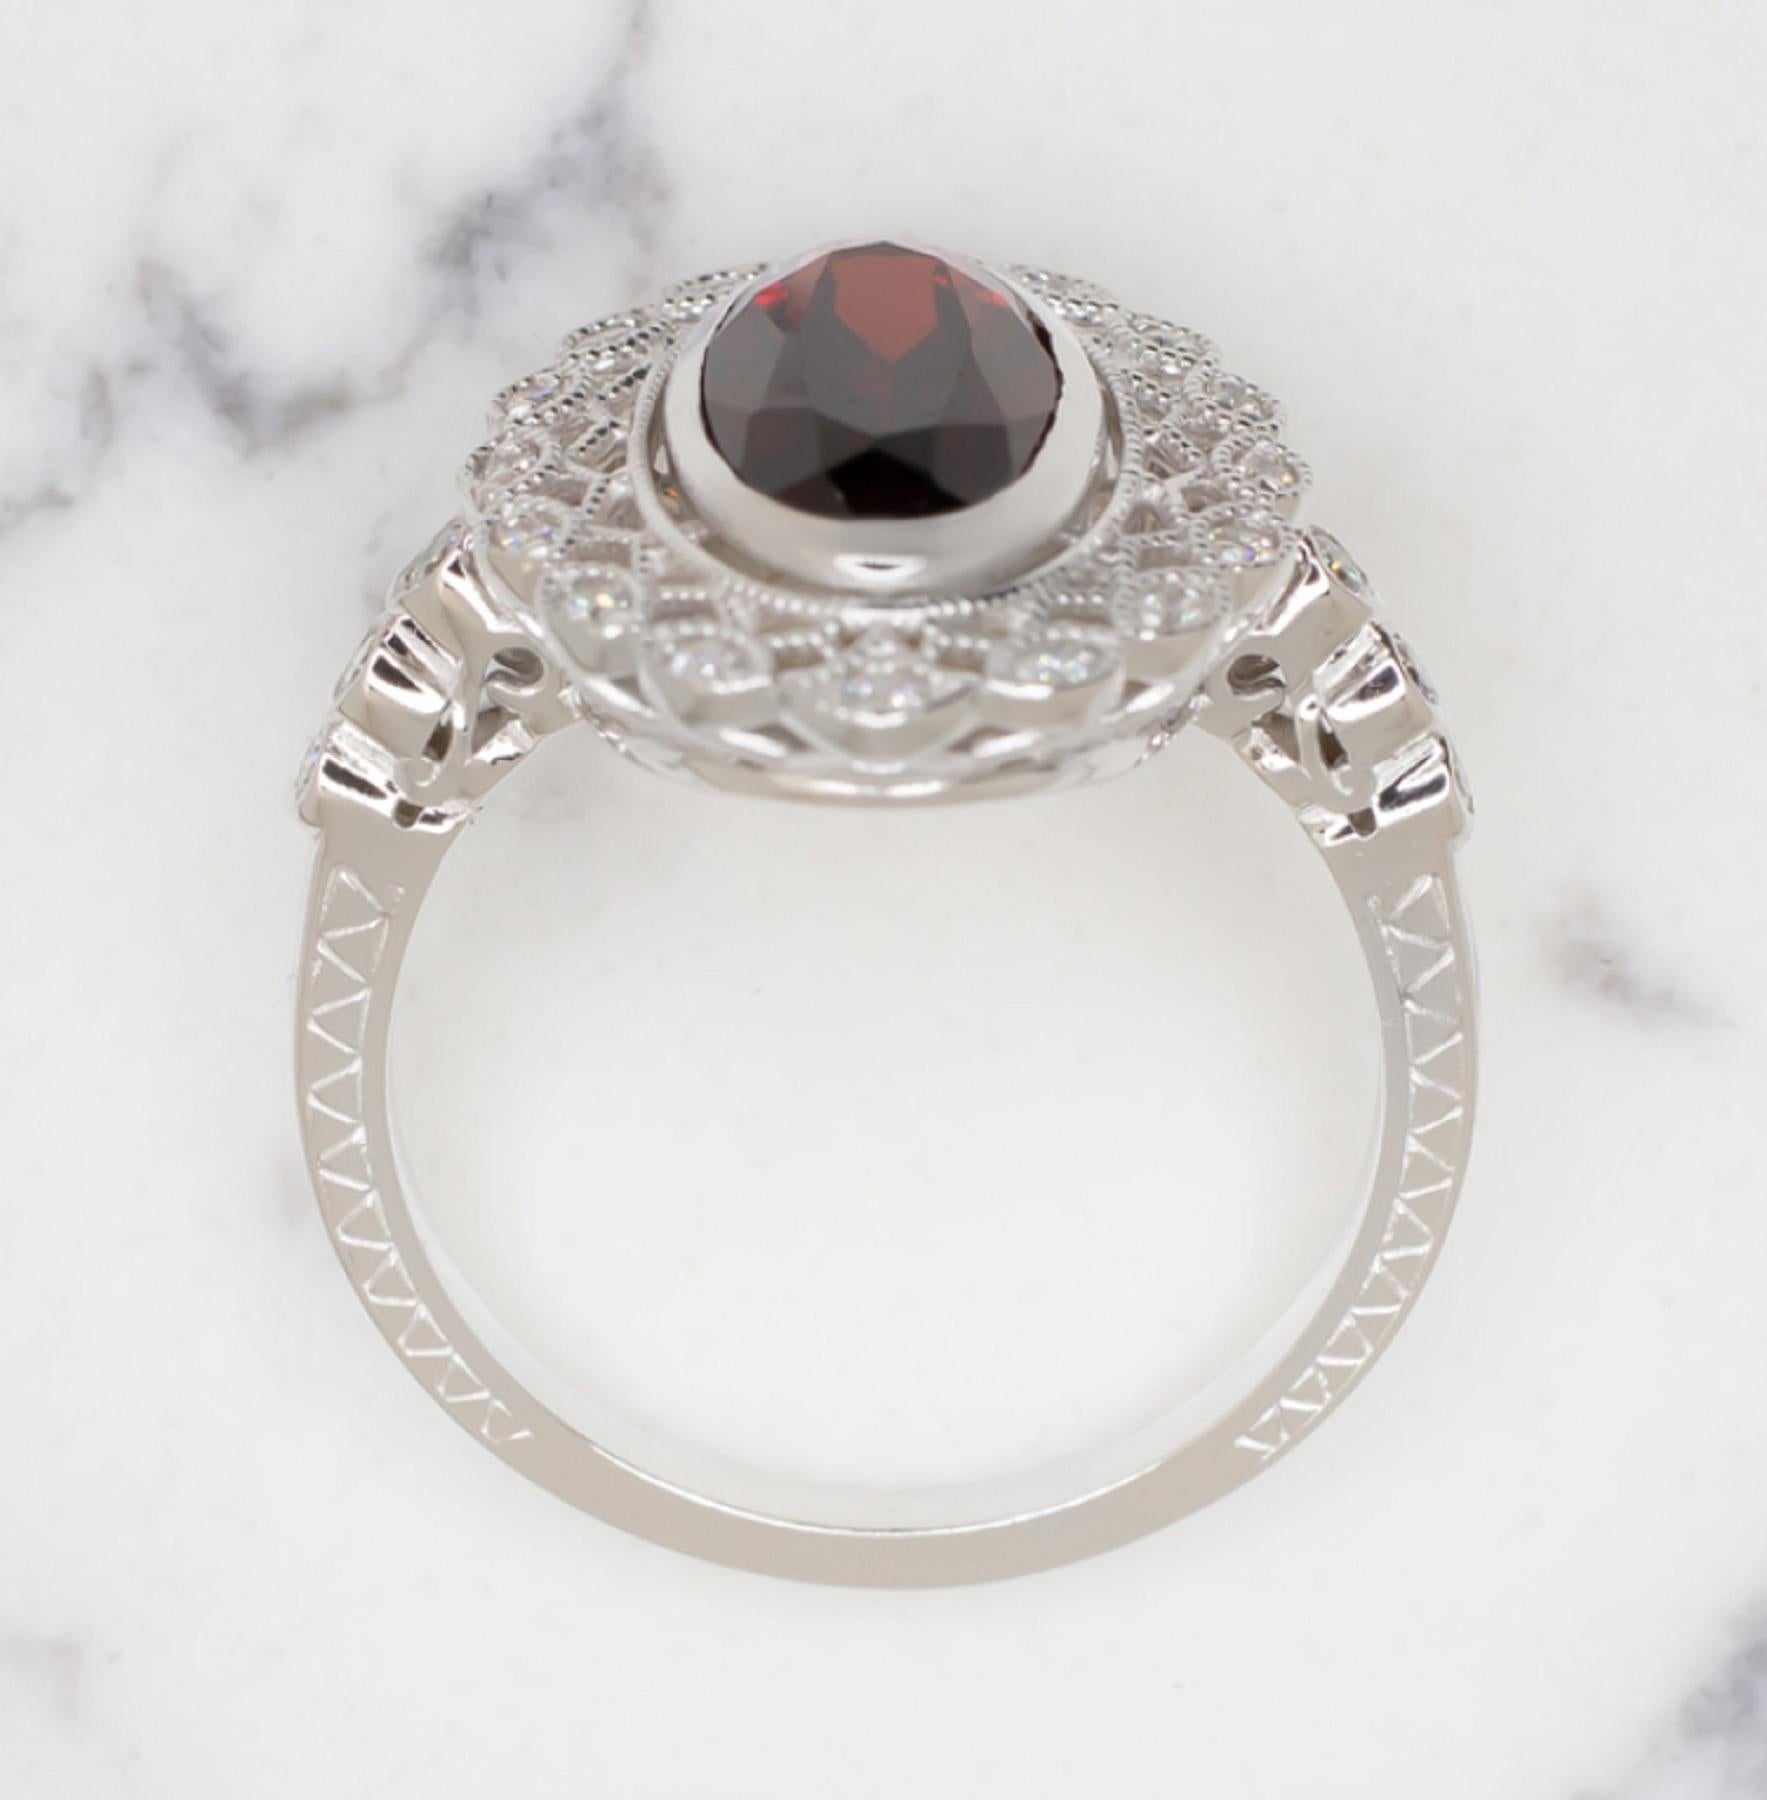 This stunning garnet and diamond ring is positively gleaming with eye catching sparkle and rich color! The 2.5ct (approximate) garnet is a gorgeous rich red hue, and it has a beautiful play of light! It stands out strikingly against the bright white